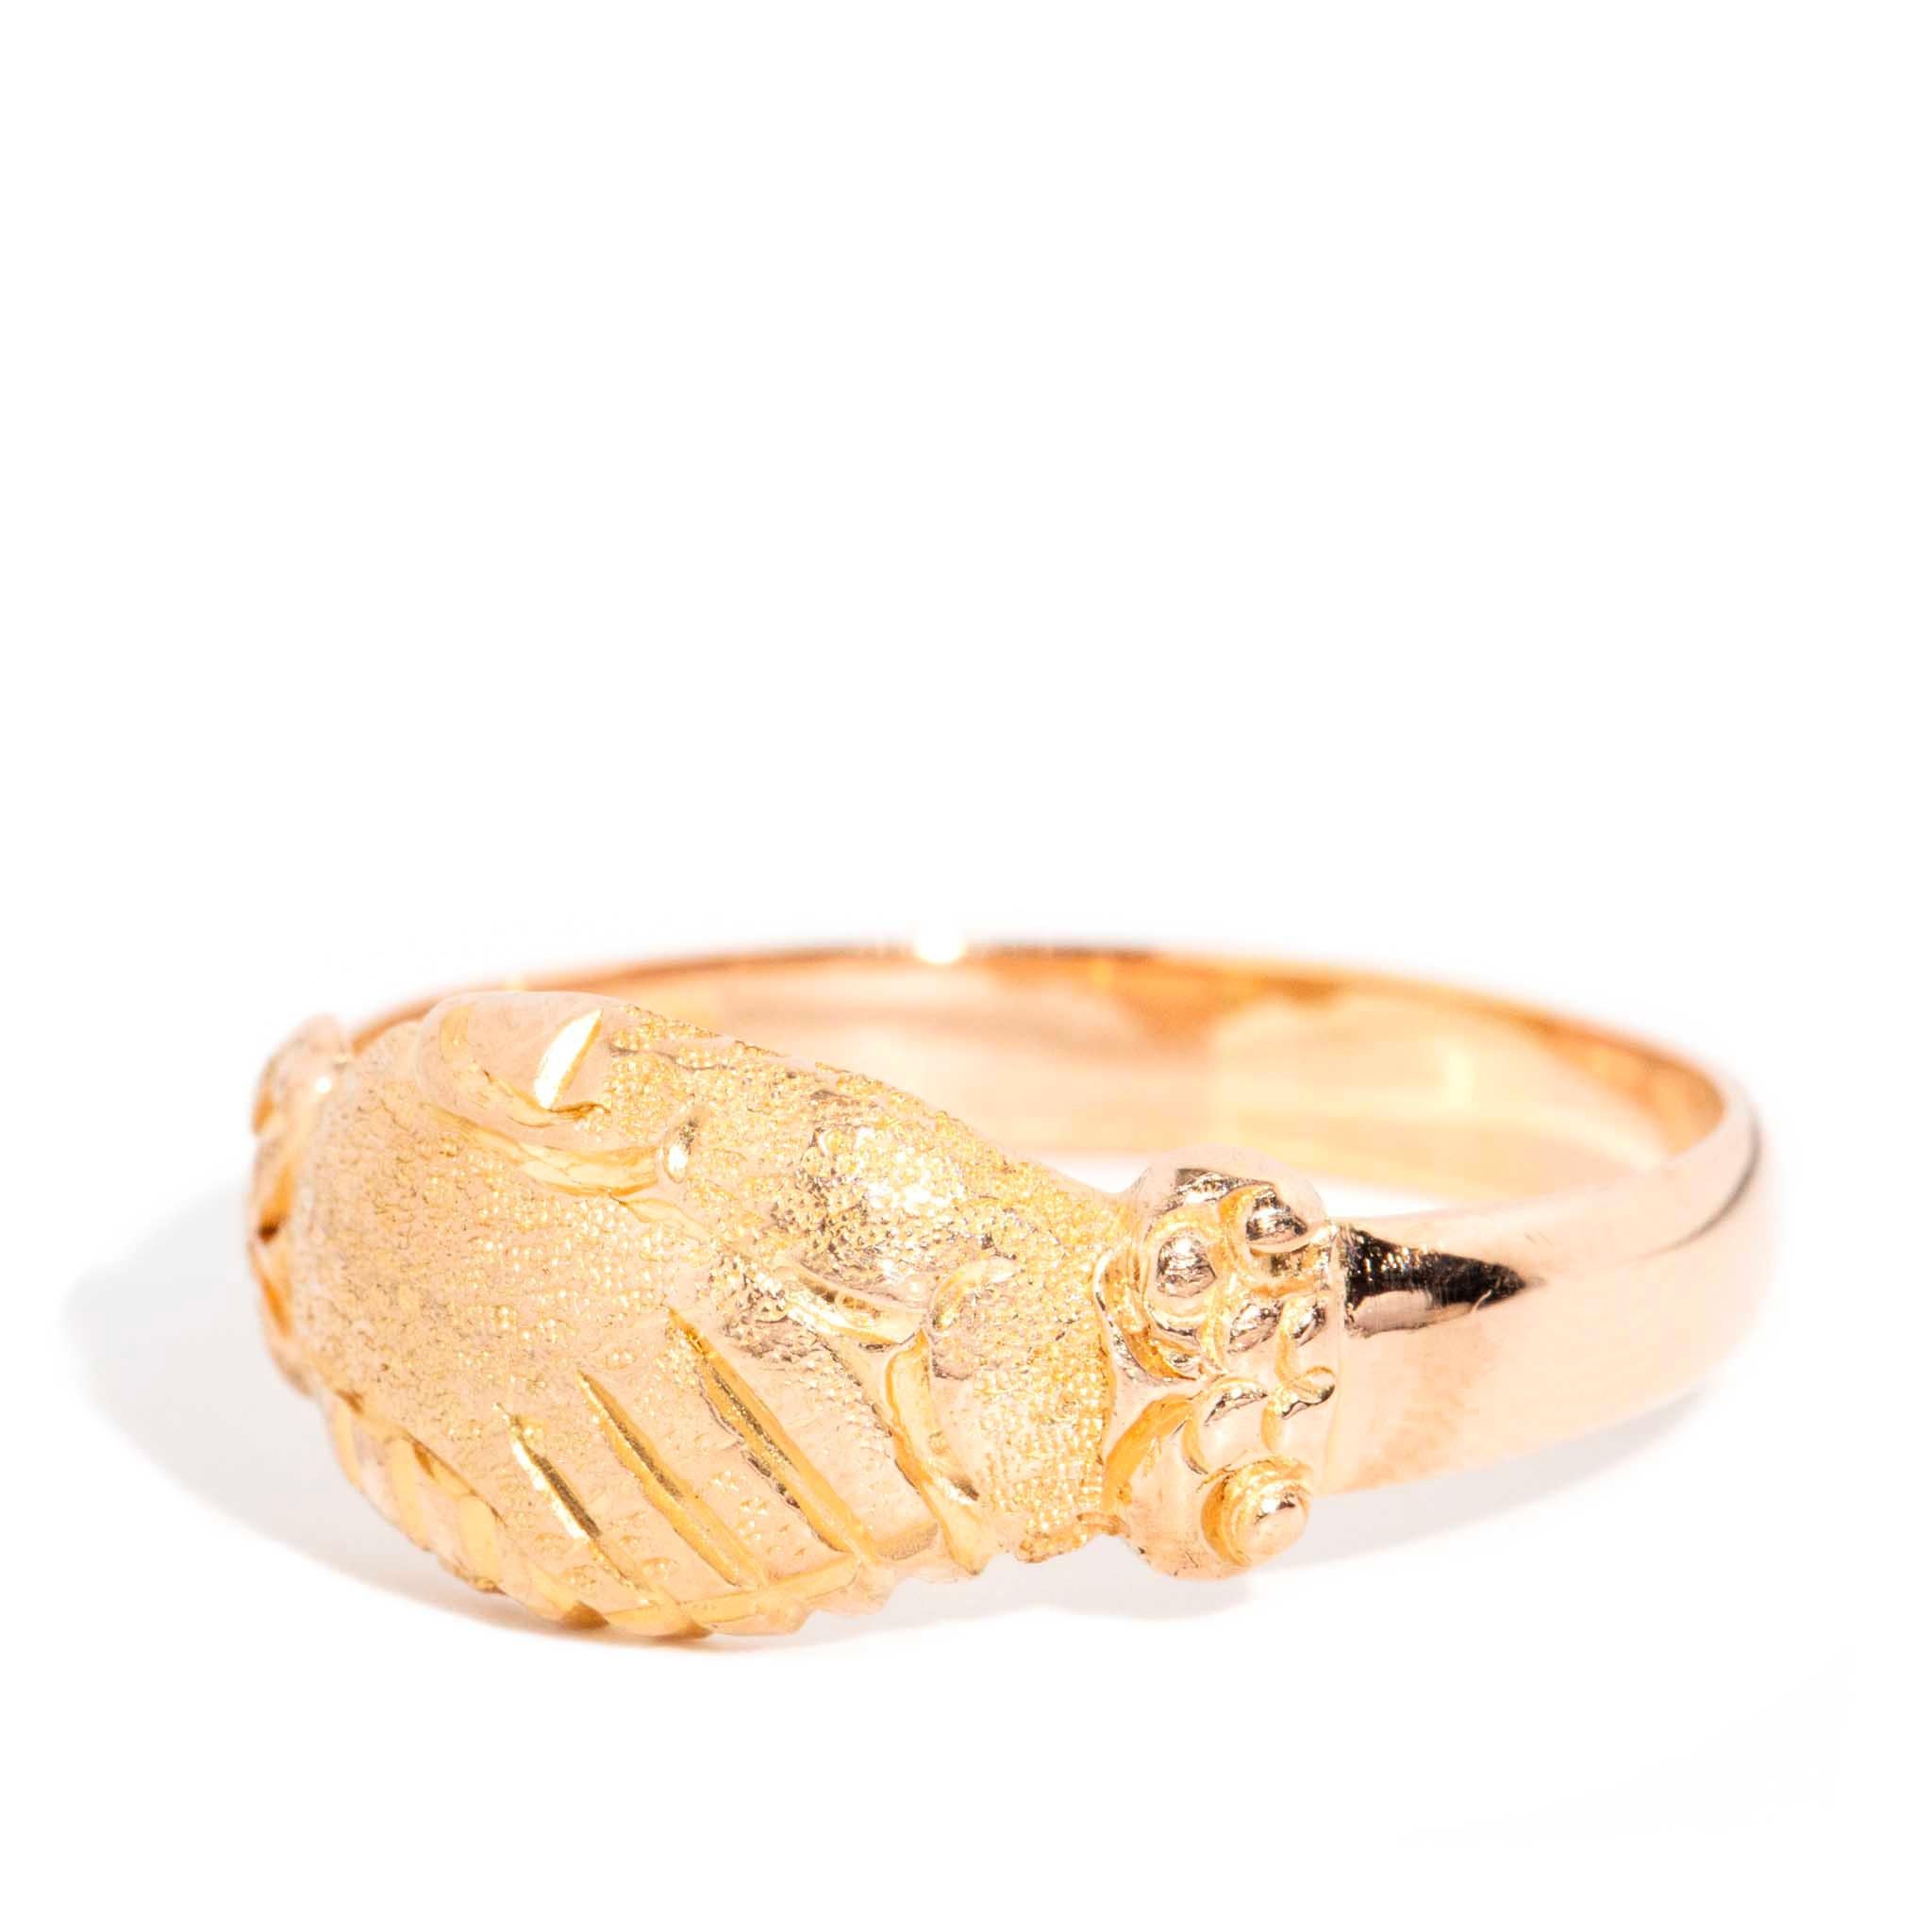 Vintage Circa 1930s Textured Fede Loyalty Ring 15 Carat Yellow Gold In Good Condition For Sale In Hamilton, AU